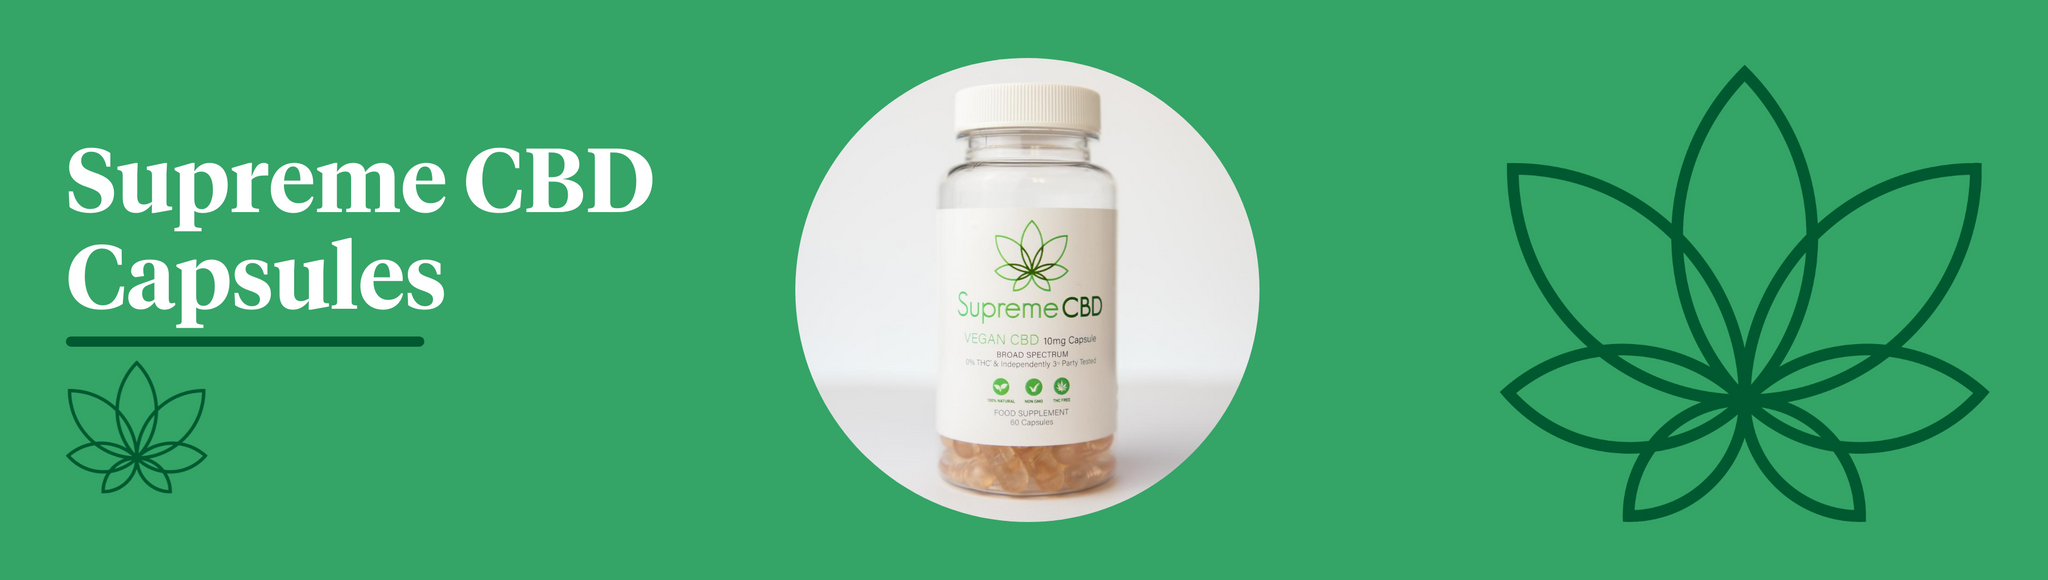 A green background with the Supreme CBD logo to the right and a bottle of Supreme CBD capsules in the centre of the image.